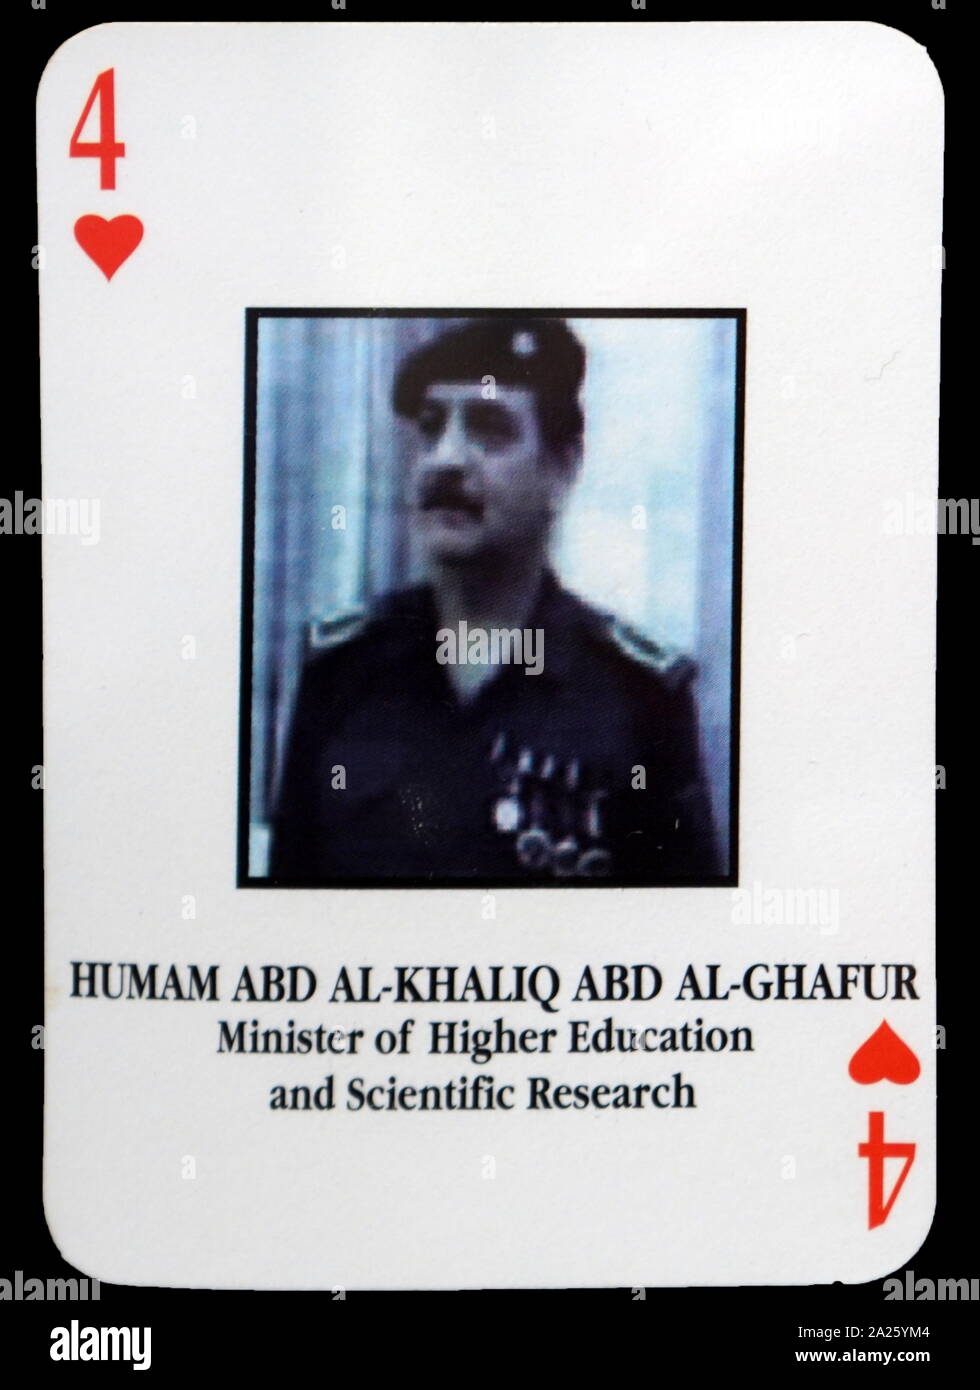 Most-wanted Iraqi playing cards - Humam Abd Al-Khaliq Abd Al-Ghafur (Minister of Higher Education and Scientific Research). The U.S. military developed a set of playing cards to help troop identify the most-wanted members of President Saddam Hussein's government during the 2003 invasion of Iraq. Stock Photo